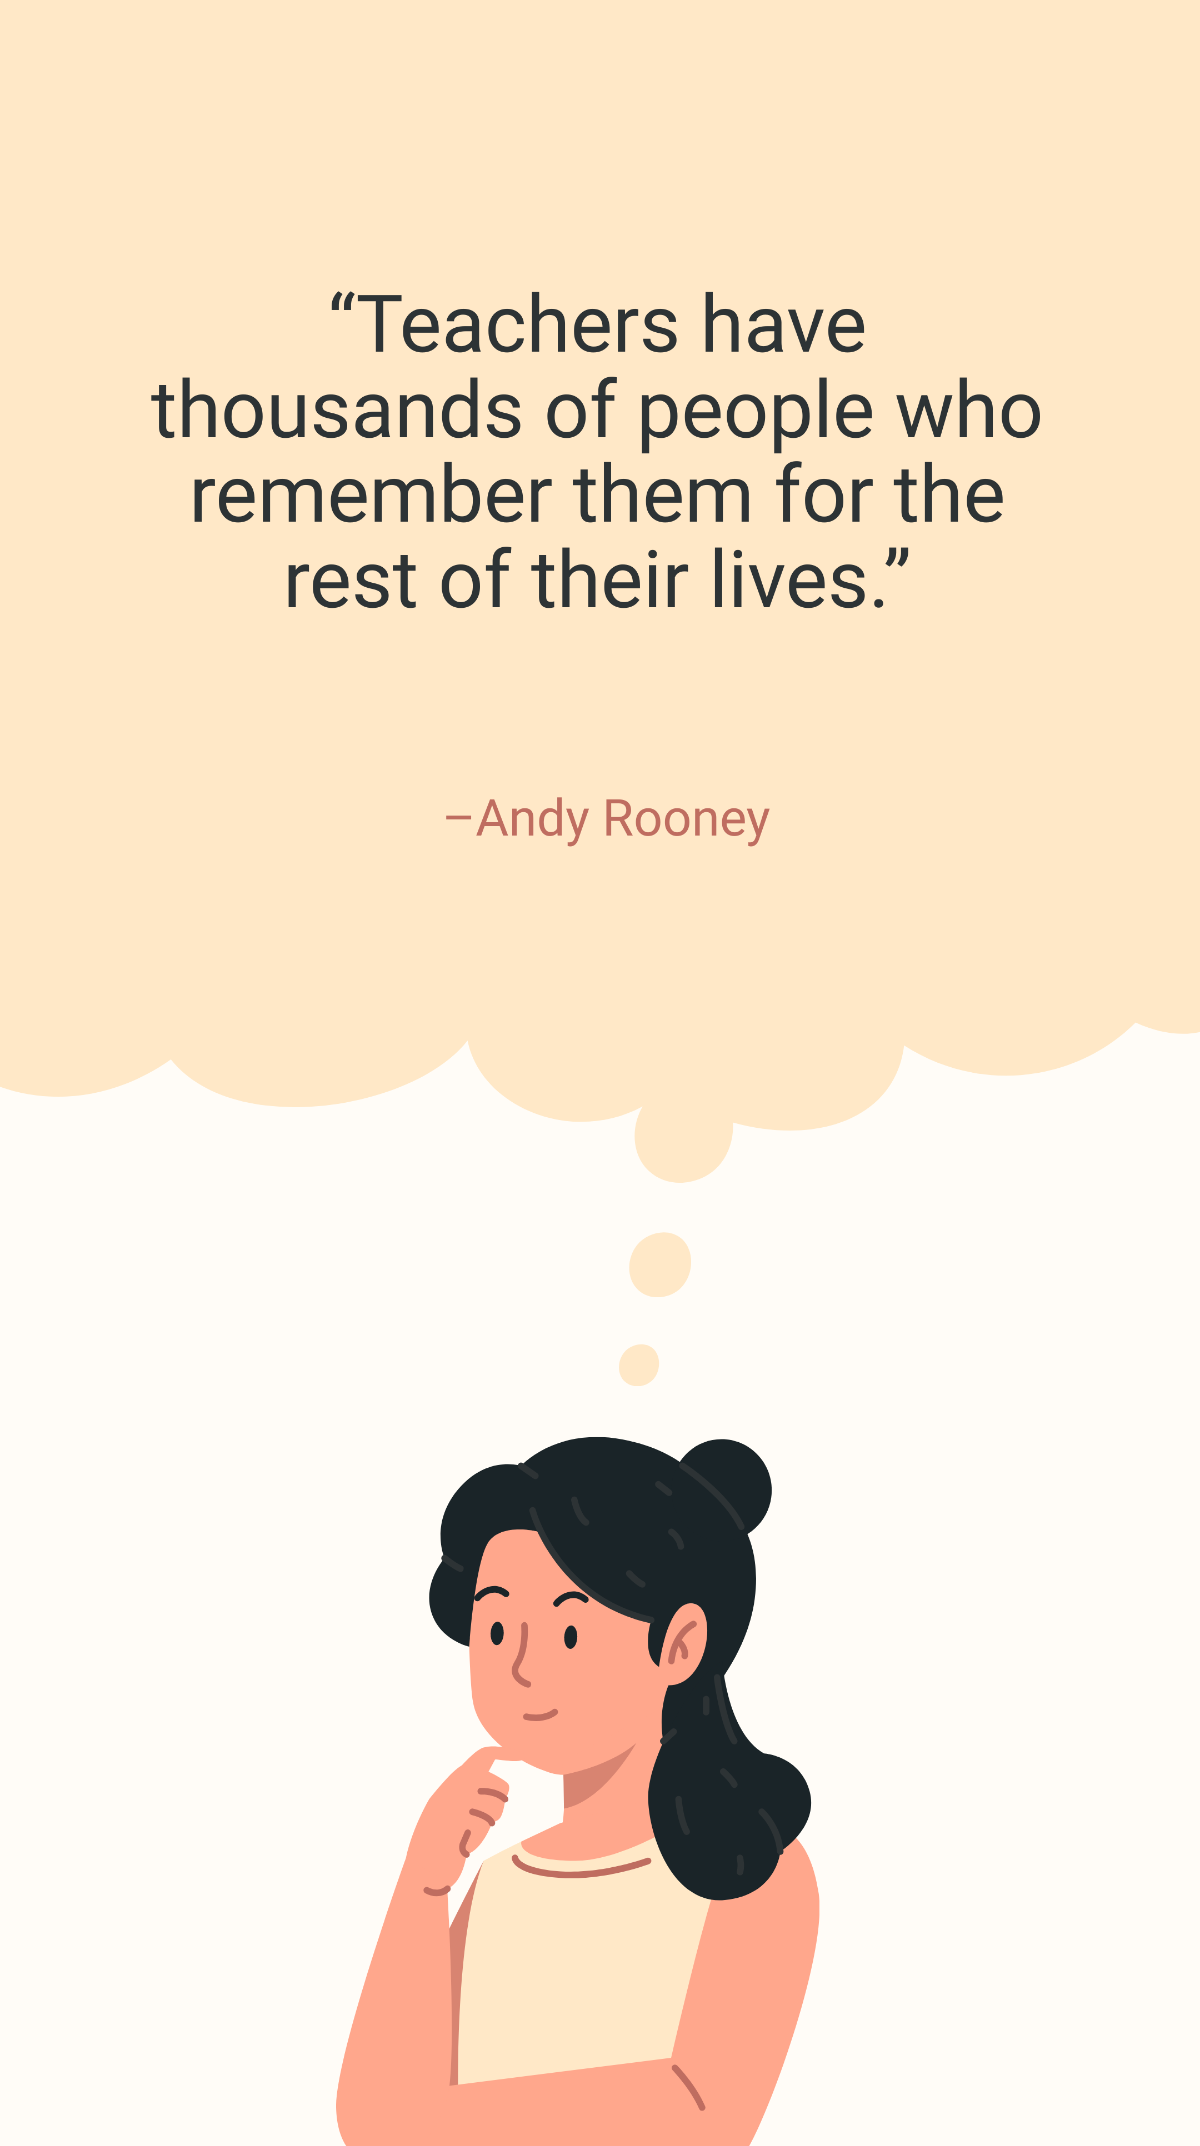 Andy Rooney - Teachers have thousands of people who remember them for the rest of their lives. Template